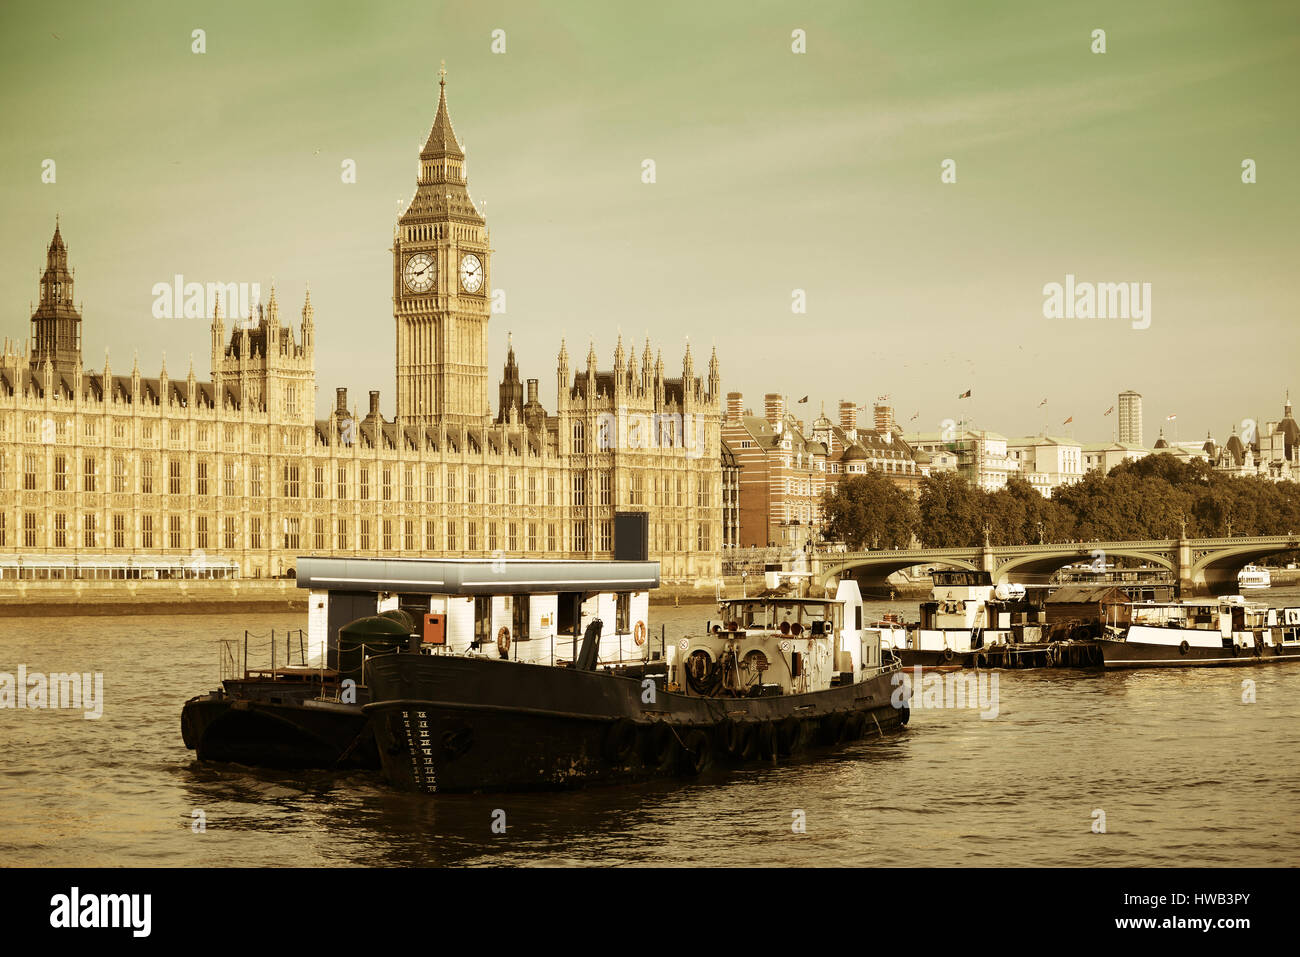 Big Ben and House of Parliament in London with boat in Thames River. Stock Photo